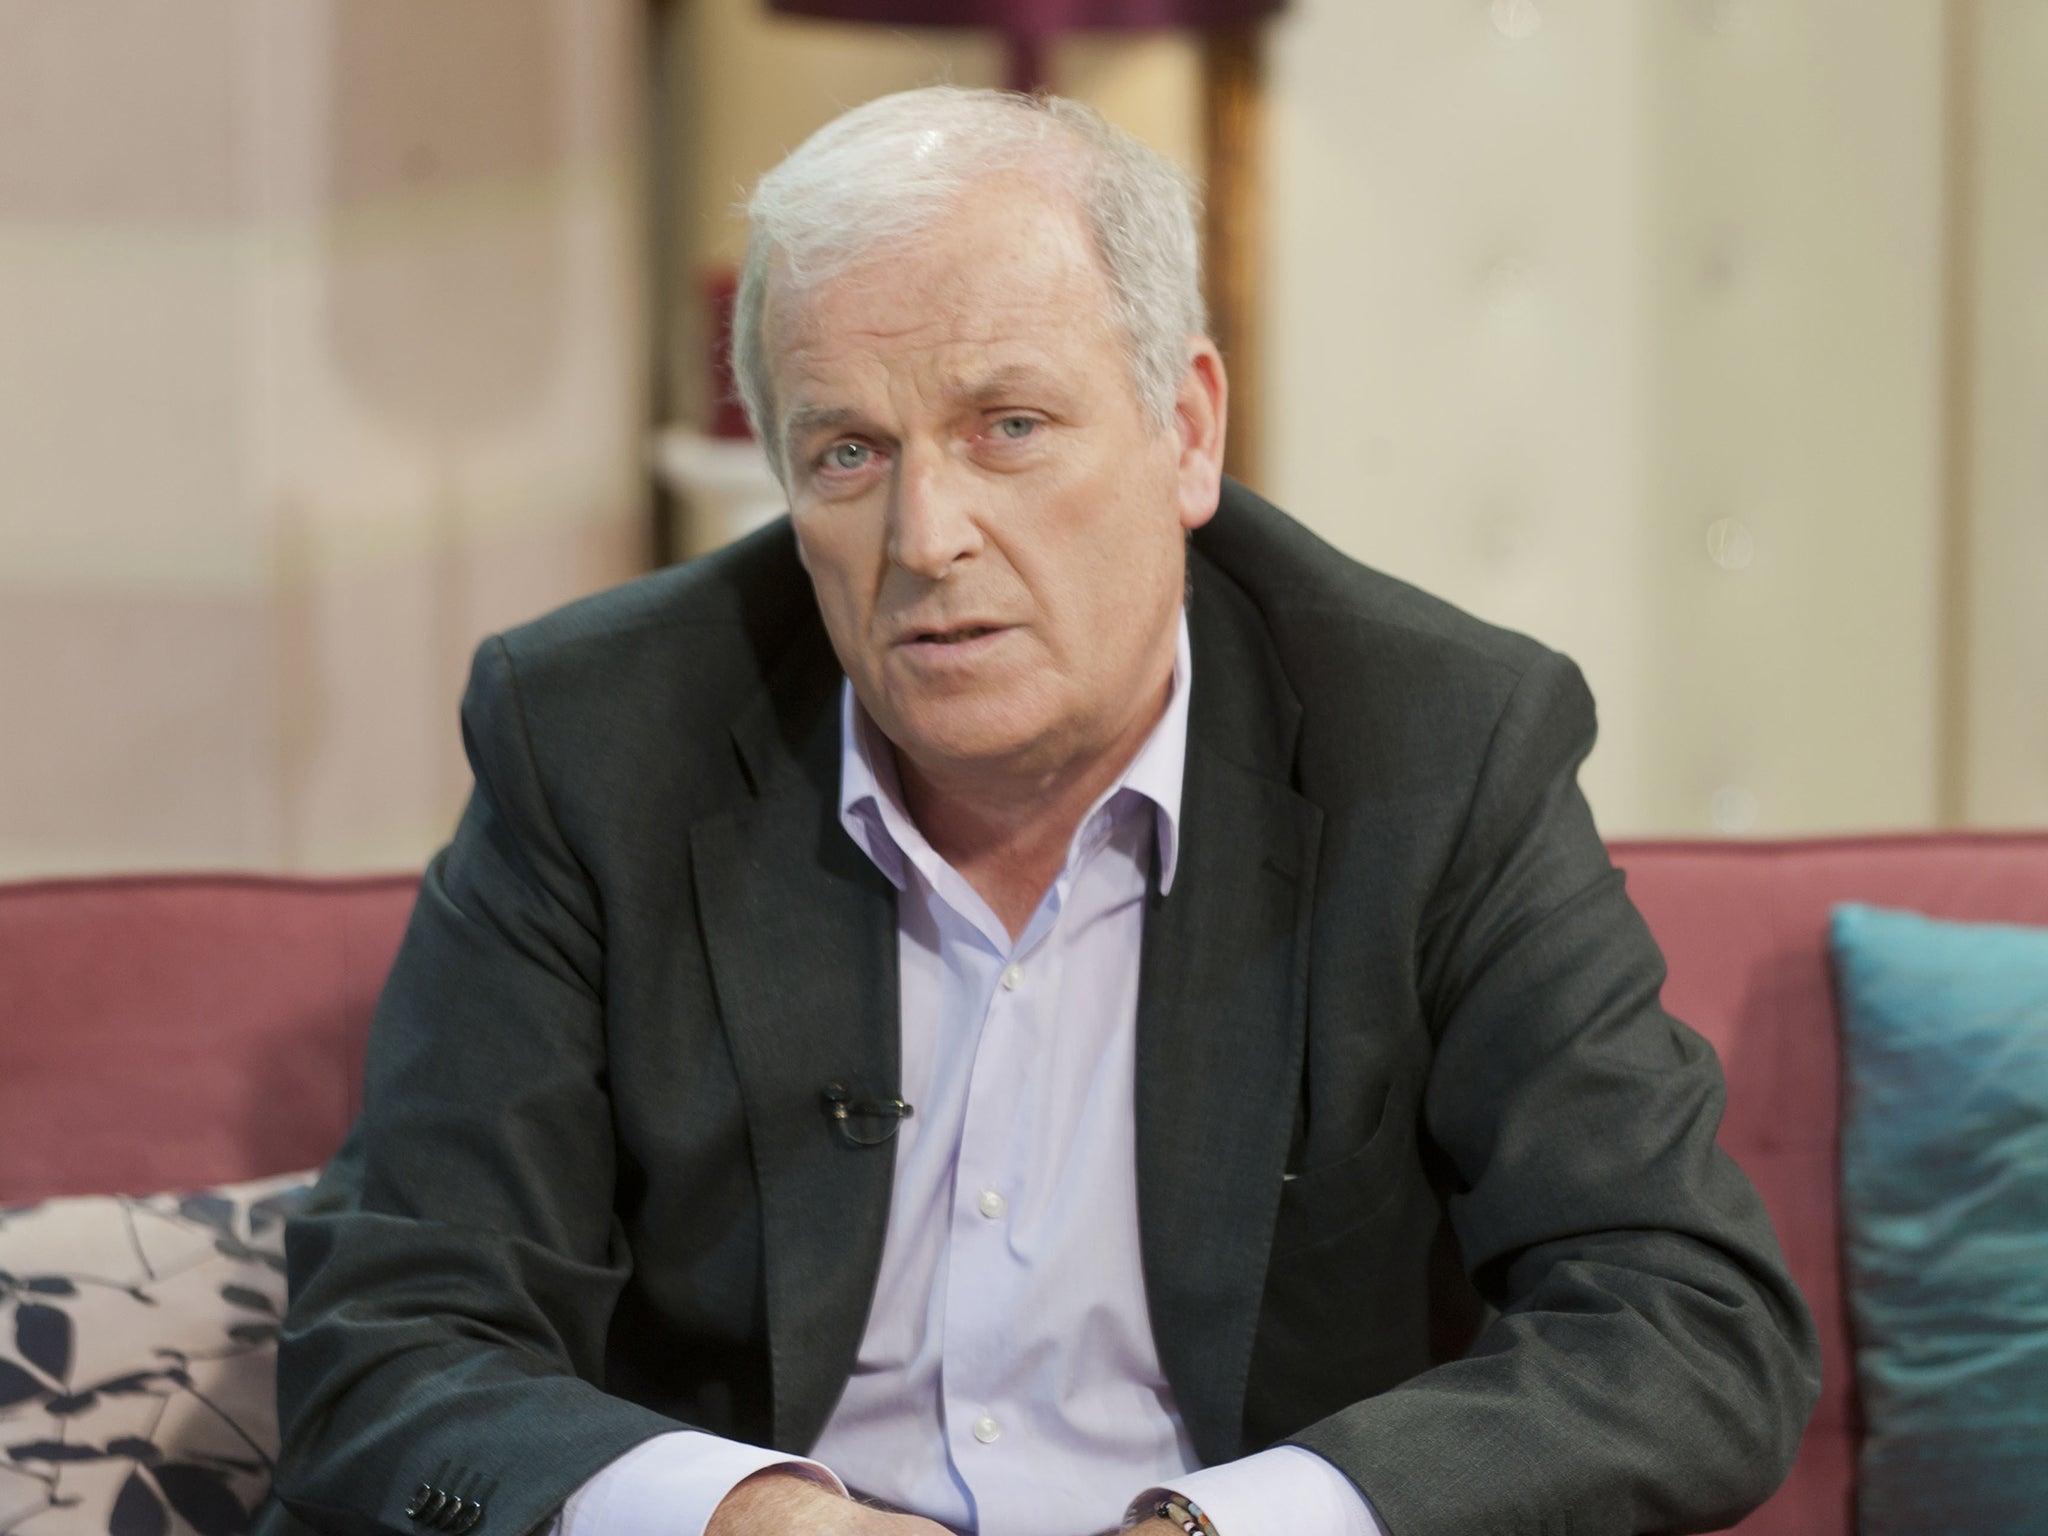 Kelvin MacKenzie says he will 'refuse to allow' controversy to tarnish his decades working with the newspaper